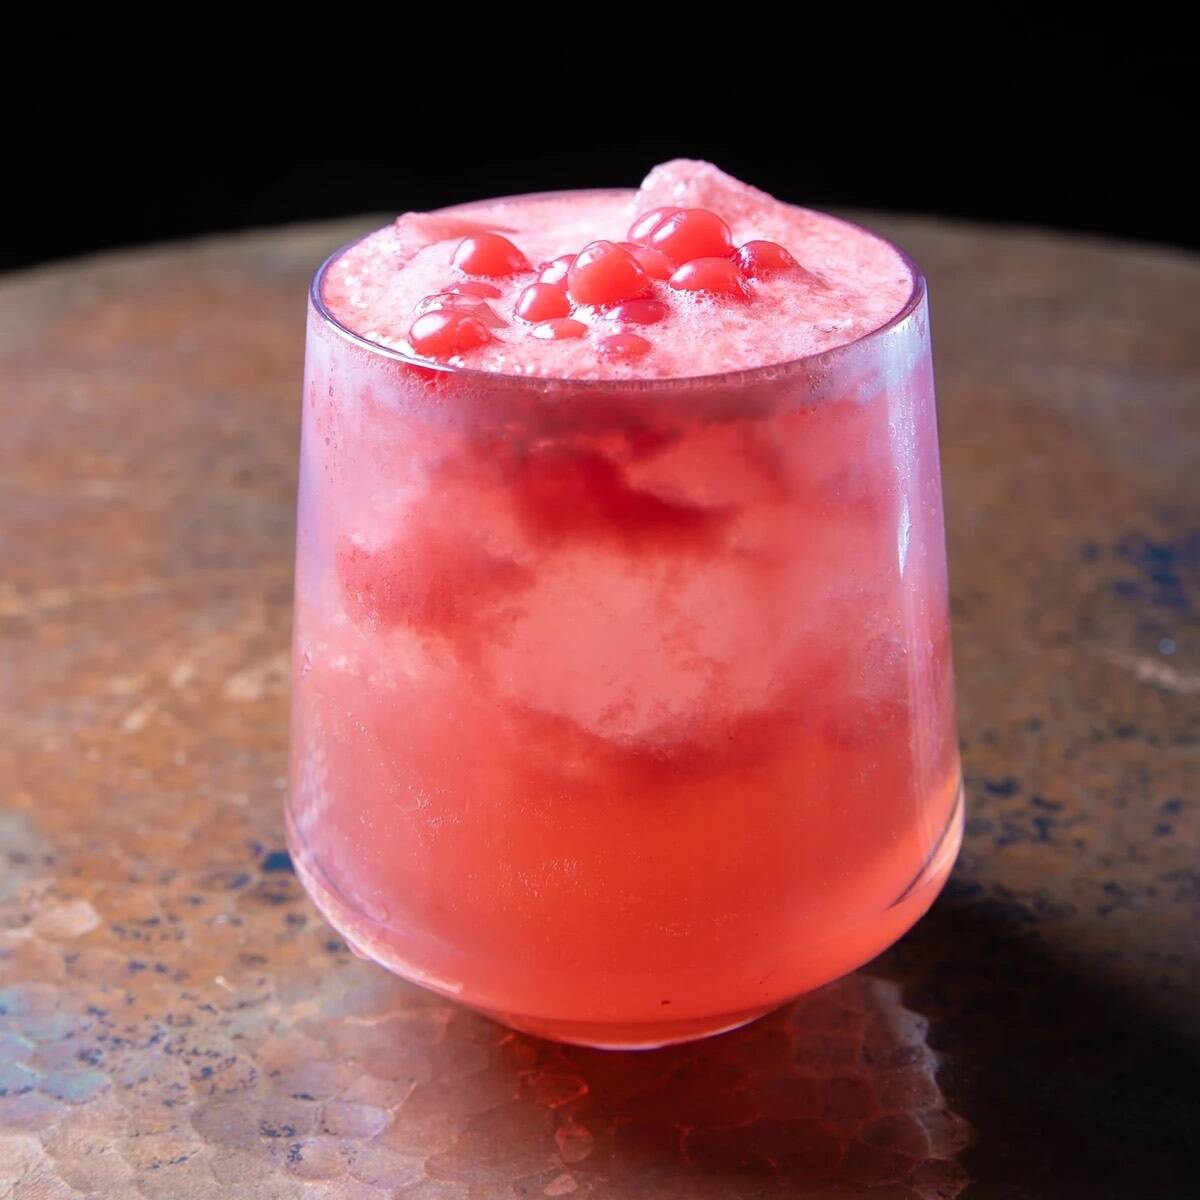 Candy Shop is Kaiyo Japanese Whisky "The Single," Makers Mark Whiskey, grapefruit liqueur, stra ...